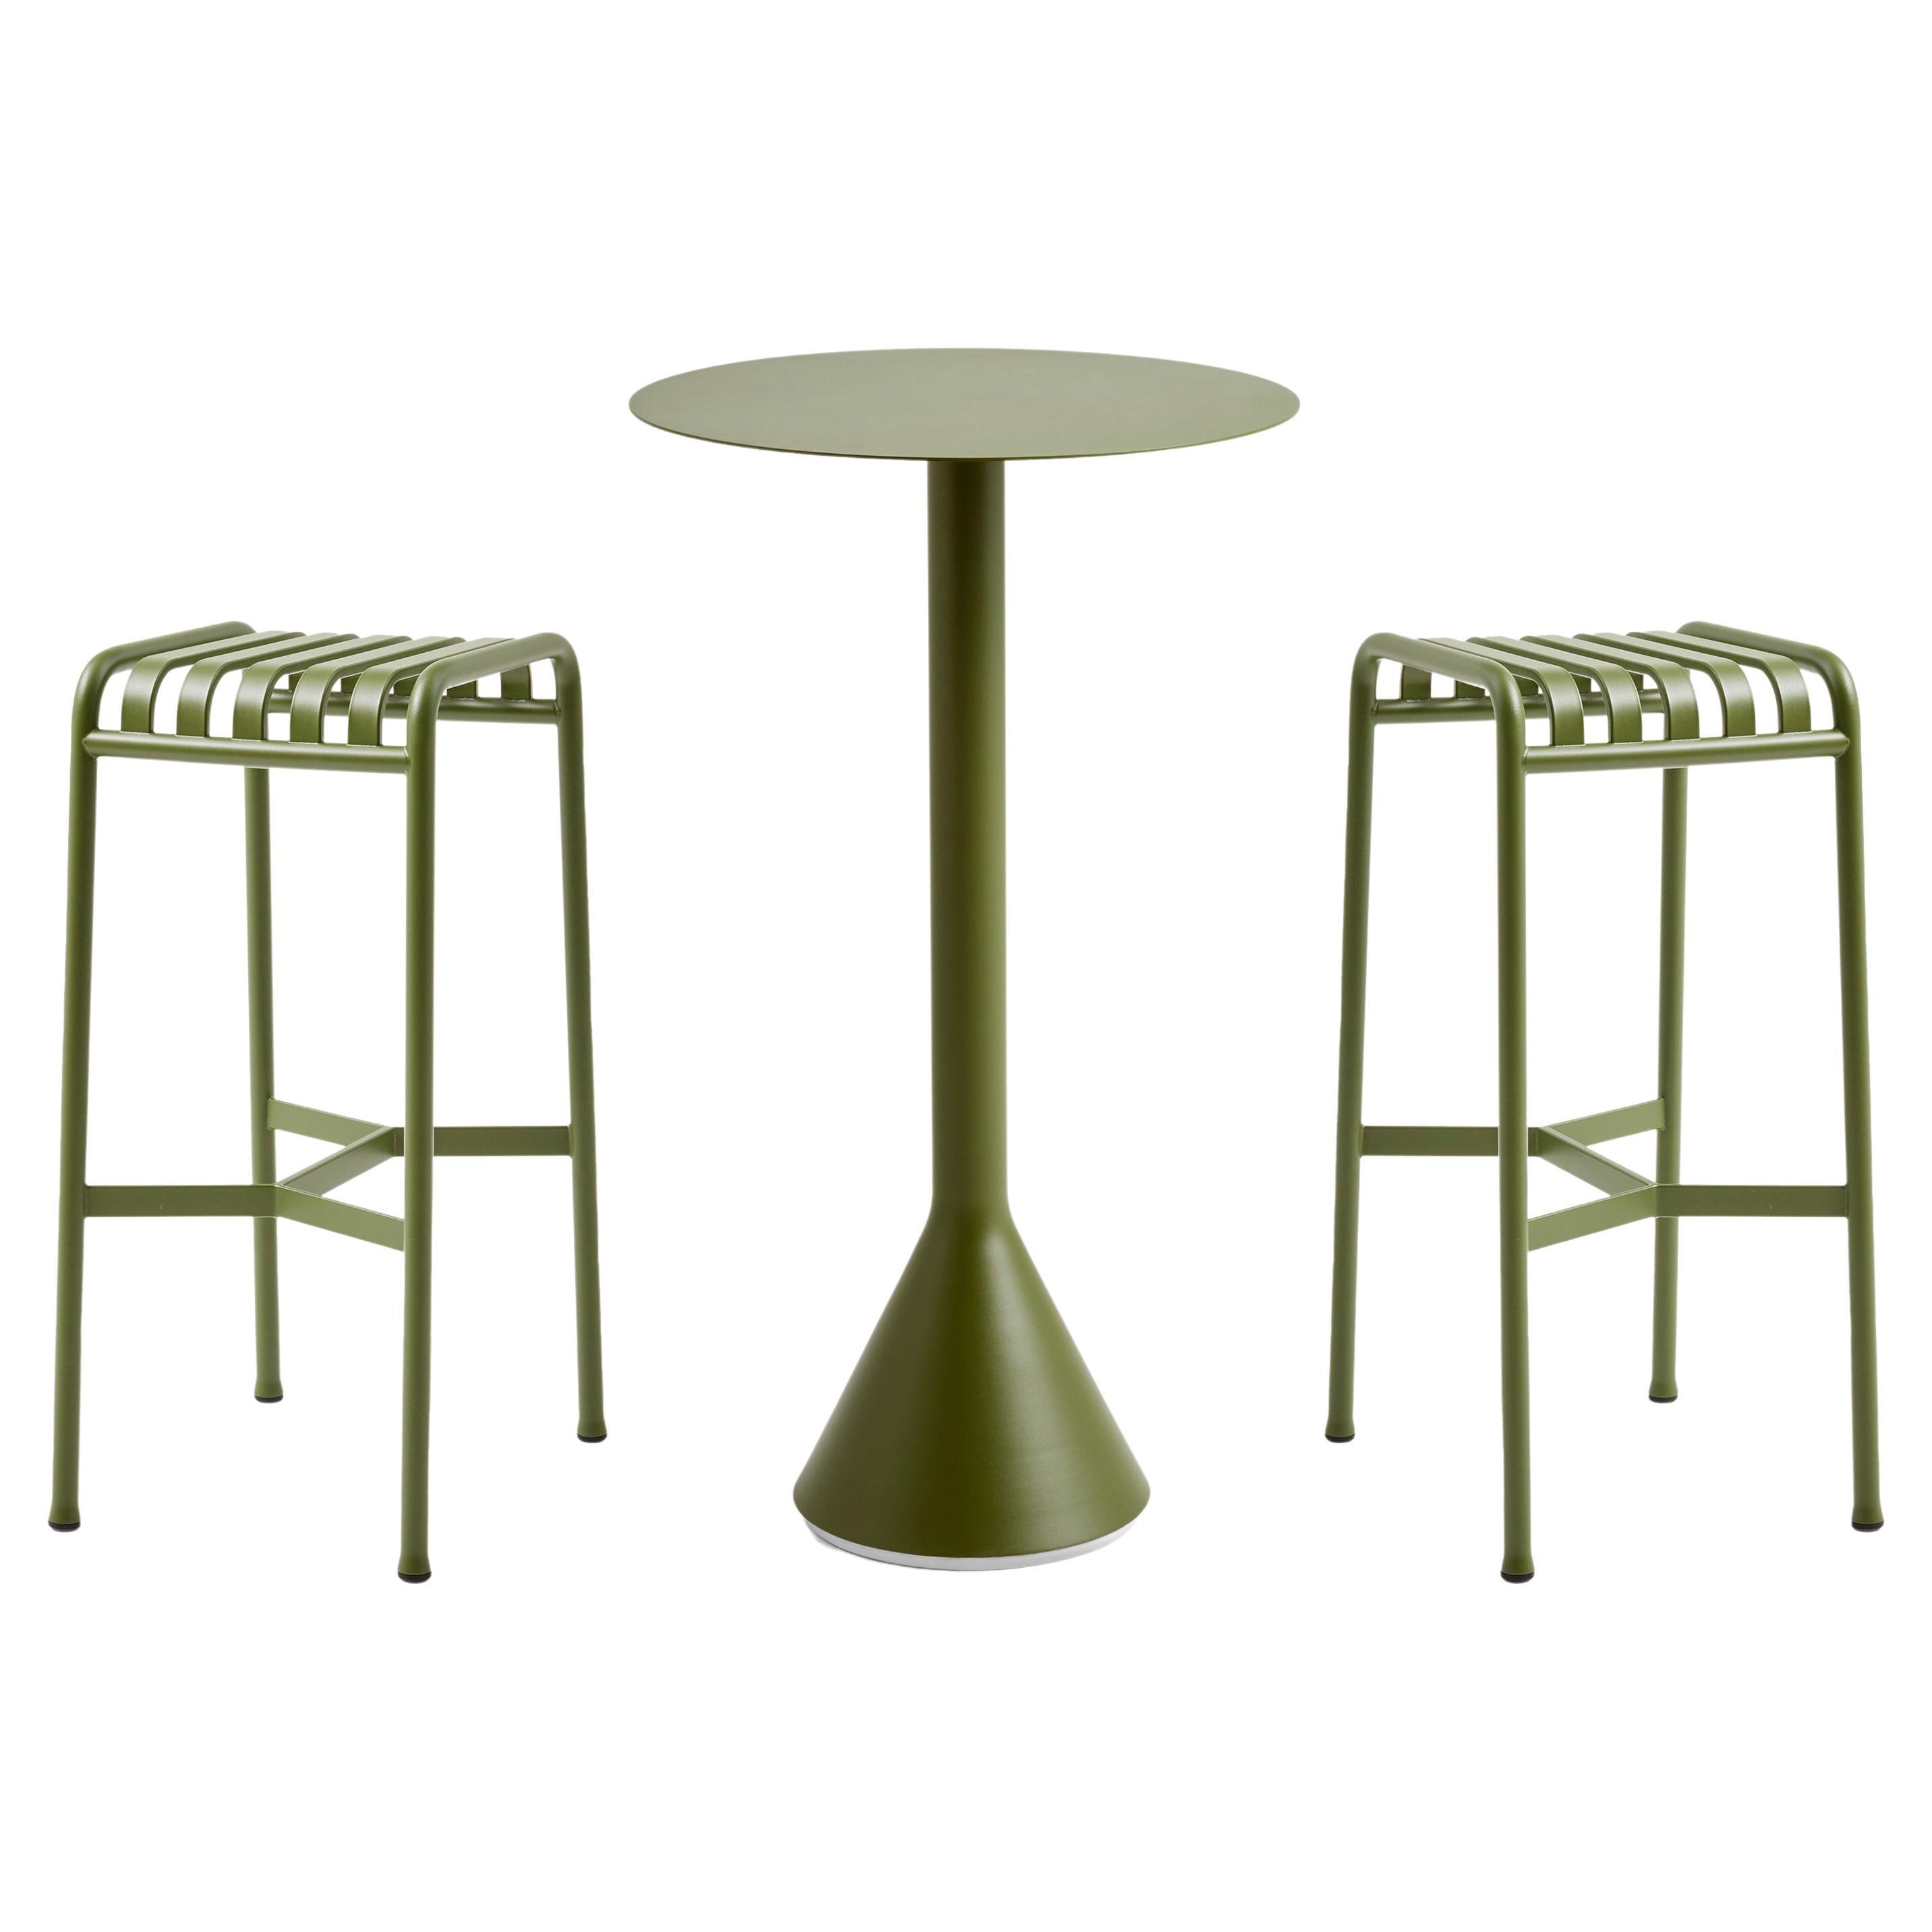 Set of Palissade Cone Table & Bar Stools-olive-by Ronan/Erwan Bouroullec for Hay For Sale